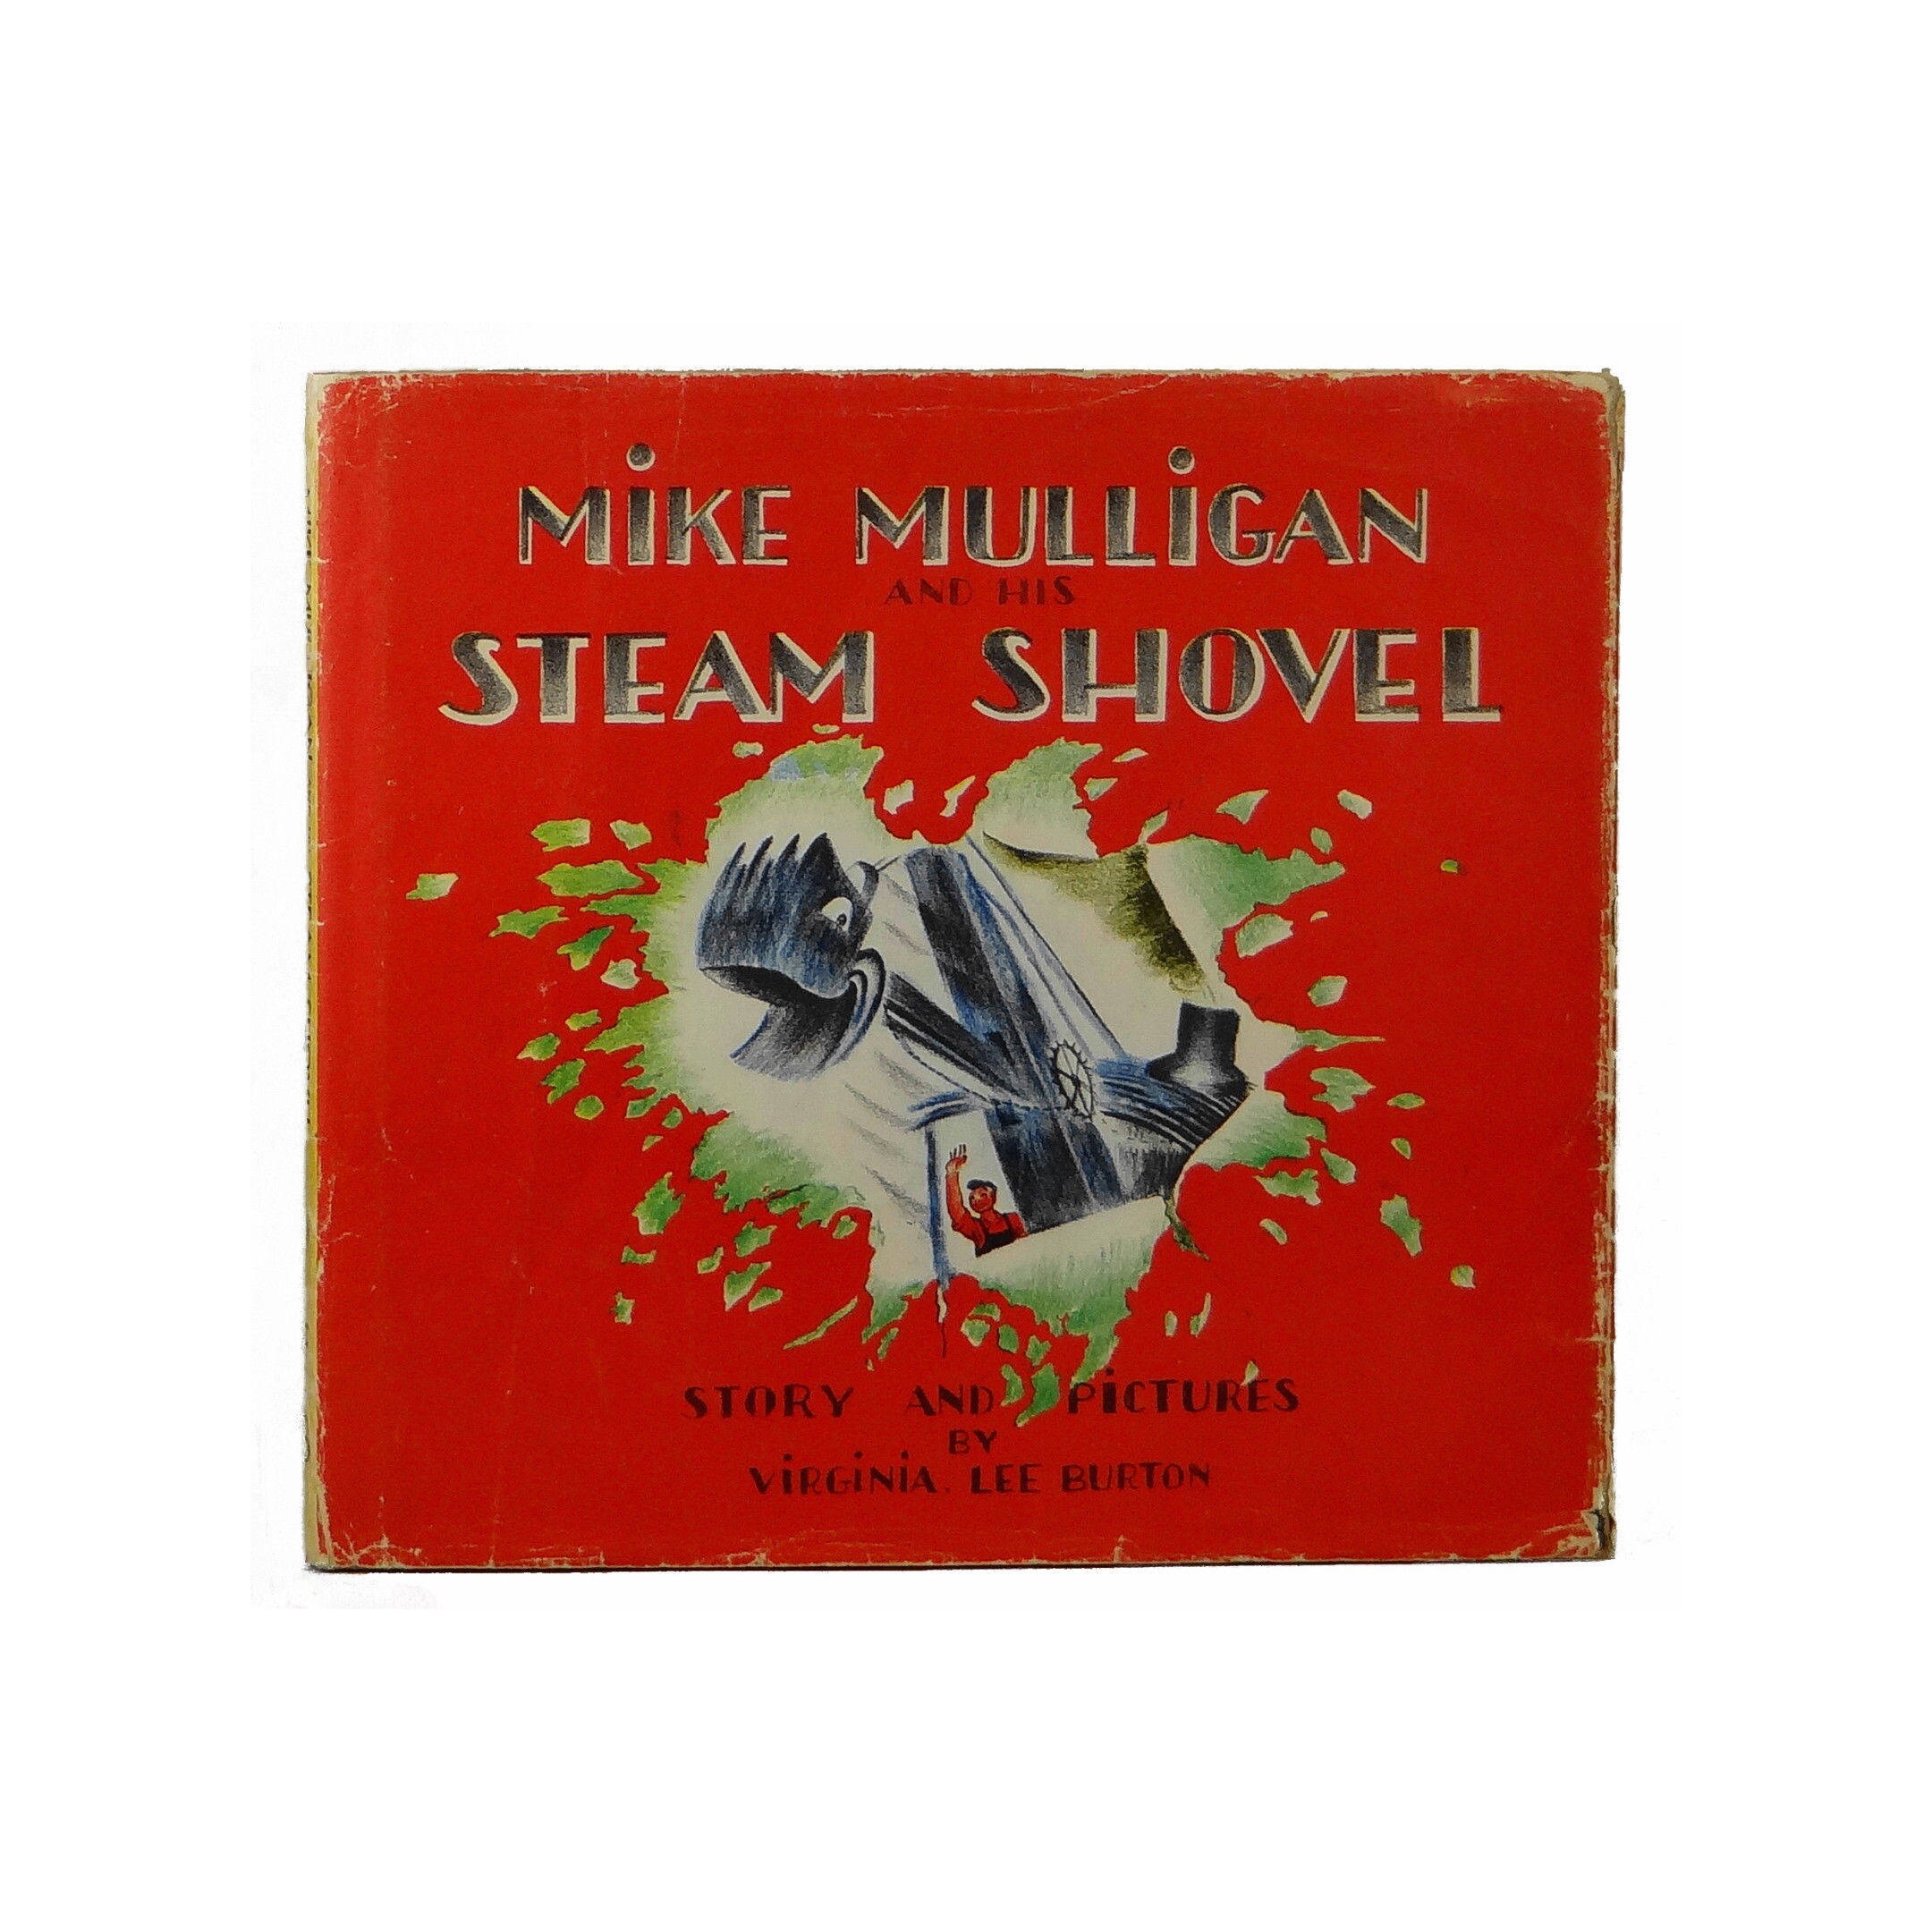 And the steam shovel фото 82